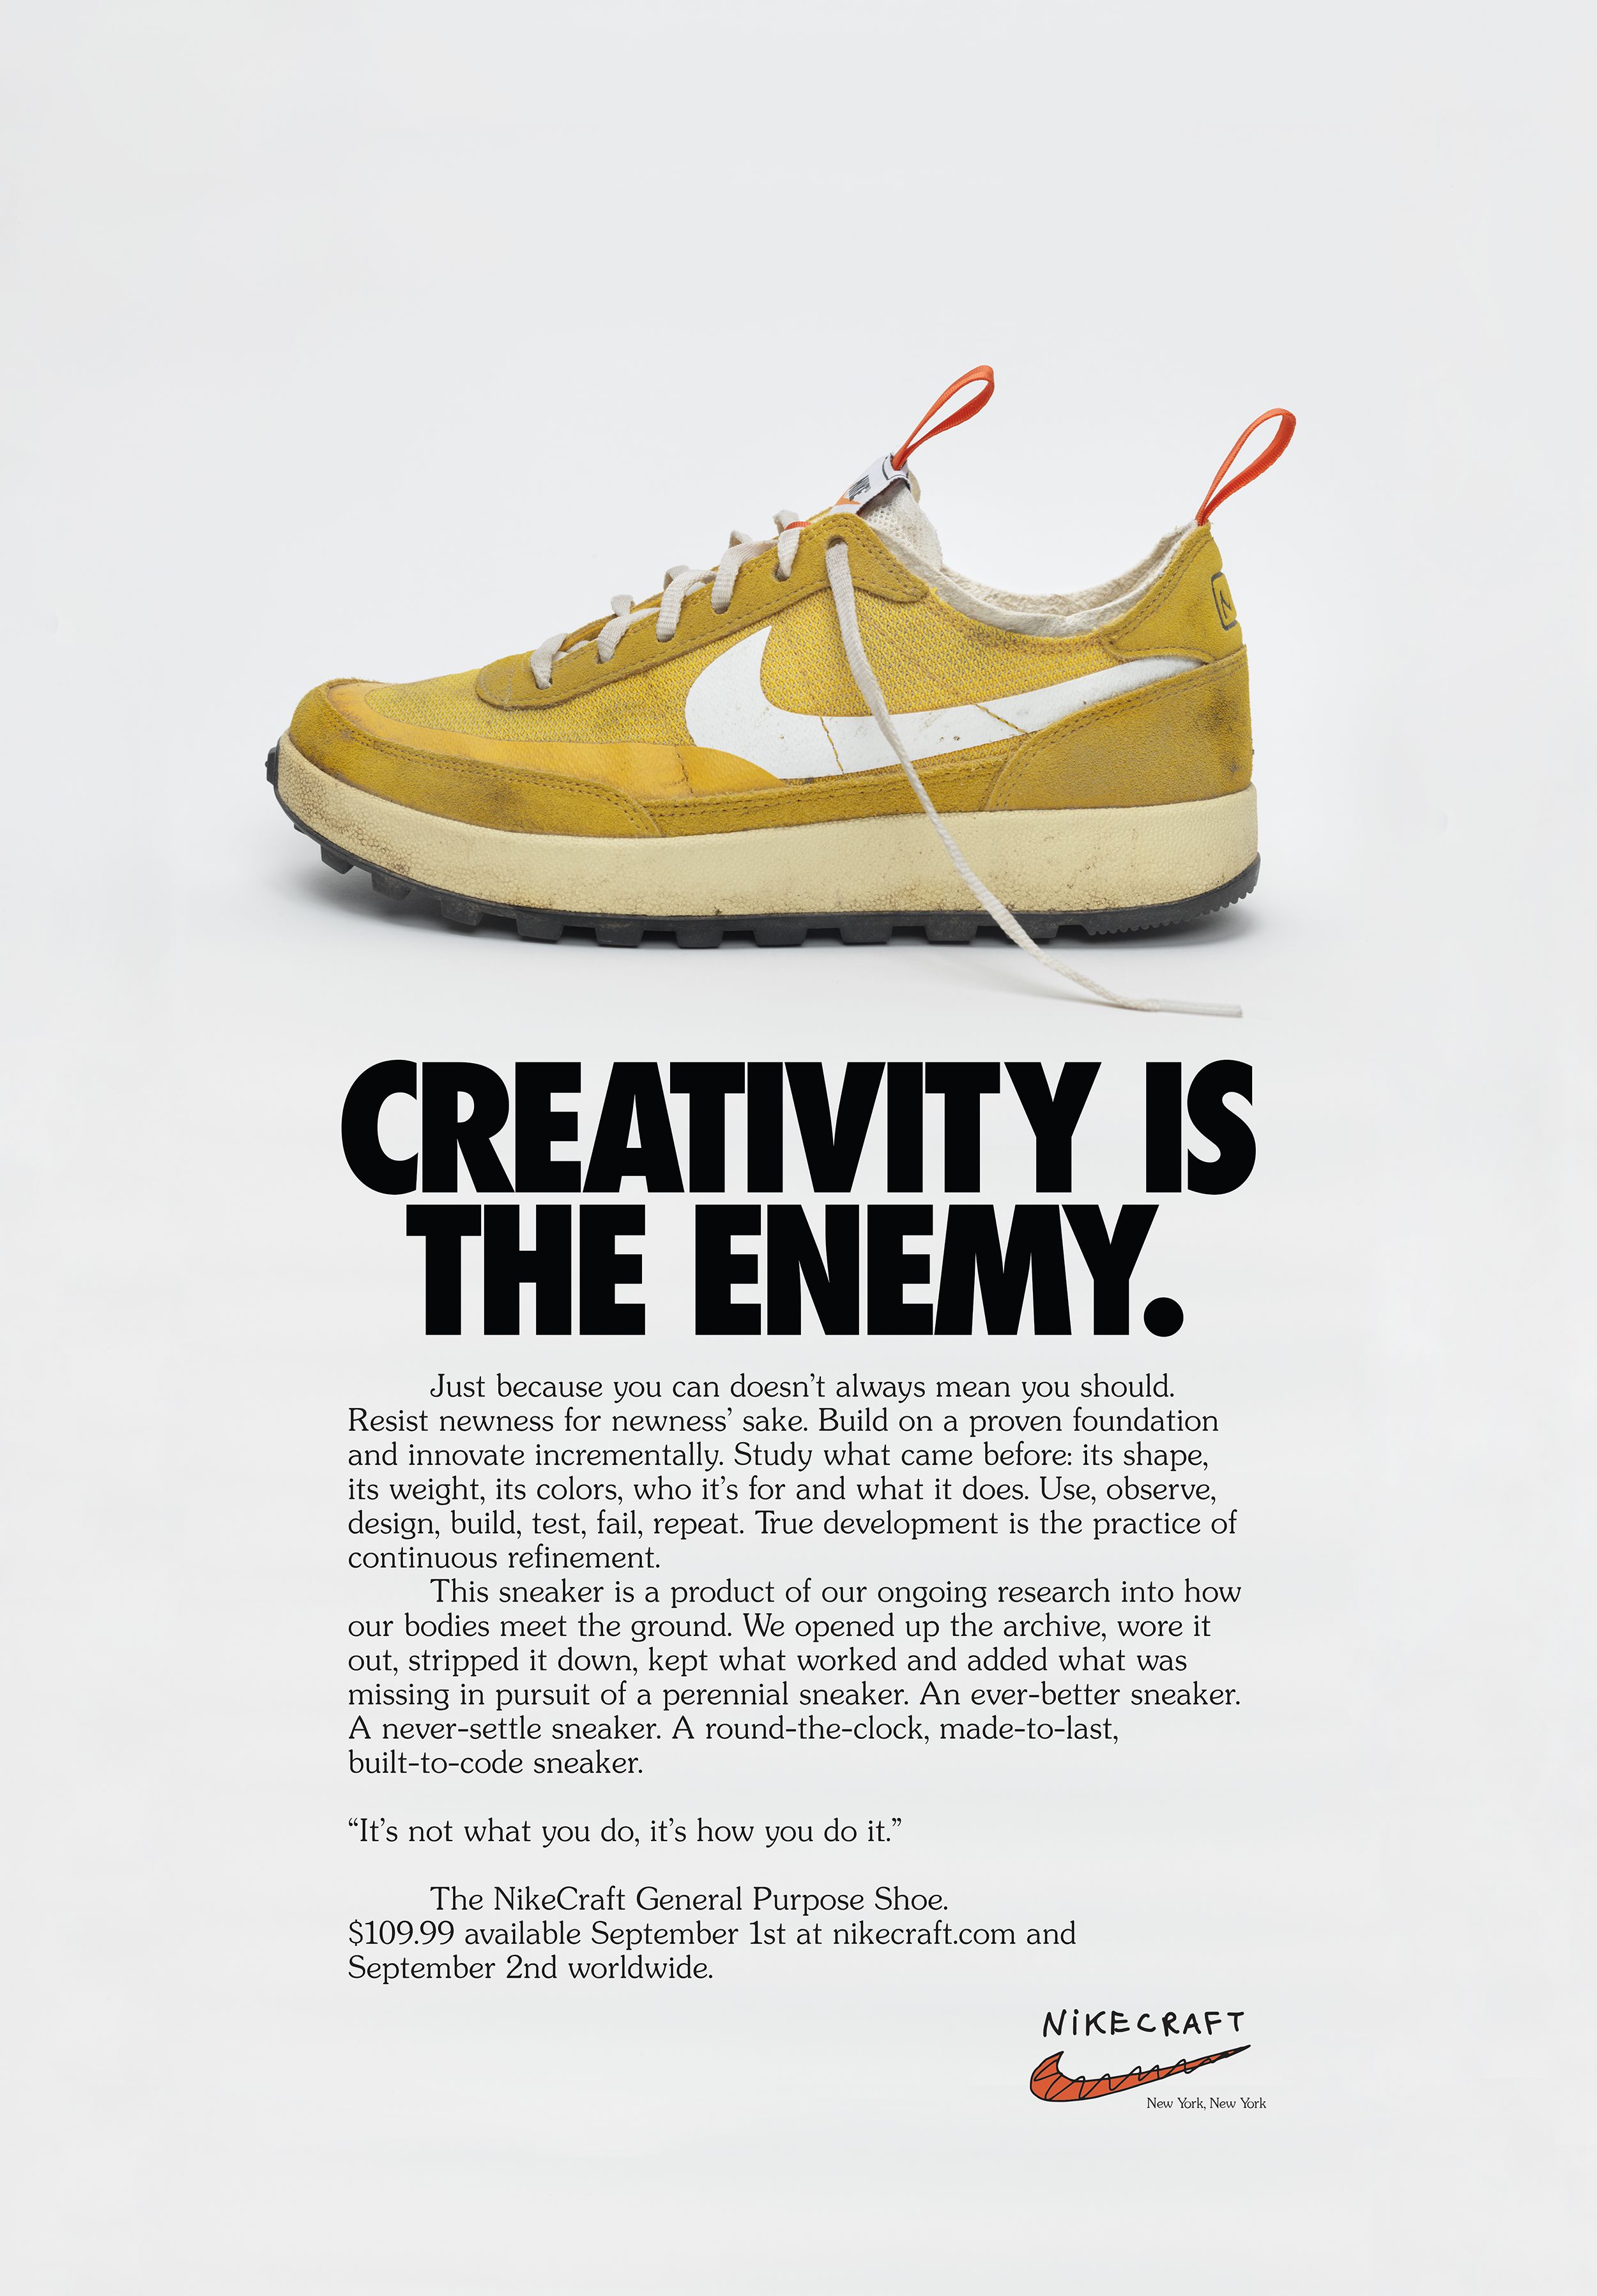 NIKECRAFT, TOM SACHS AND NIKE'S STORY